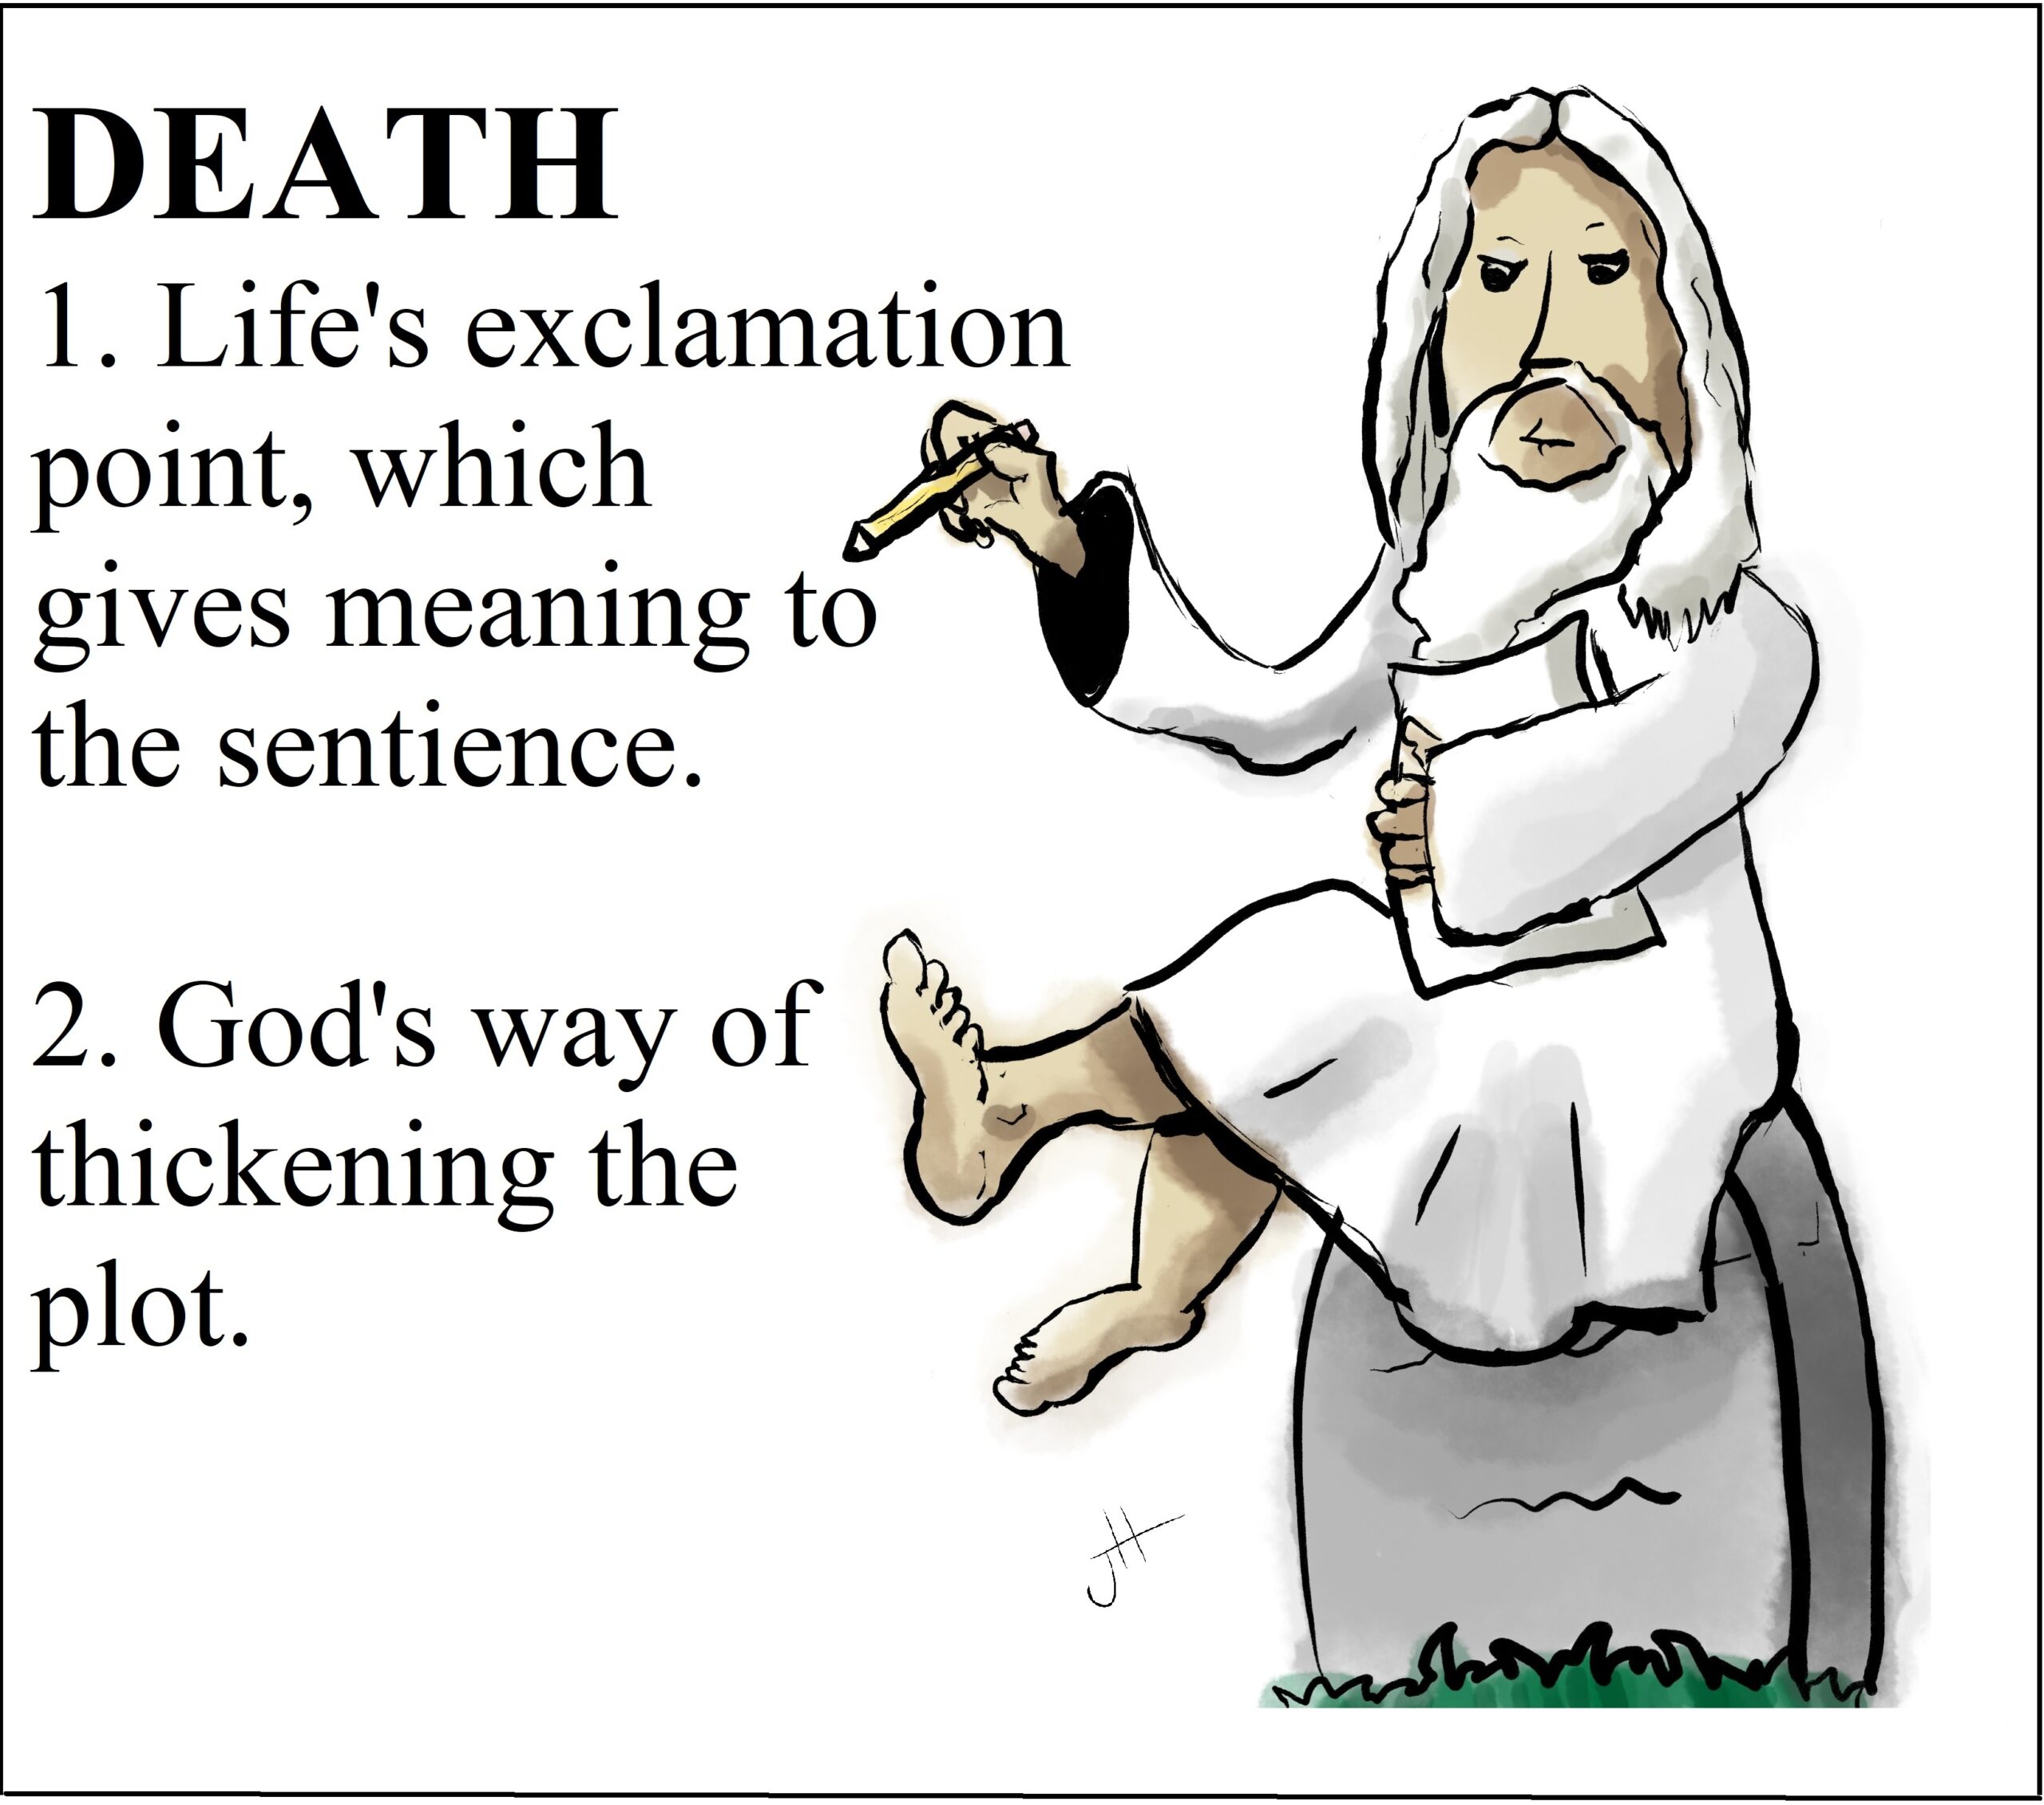 From "The Trickster's ContraDictionary" - Death cartoon